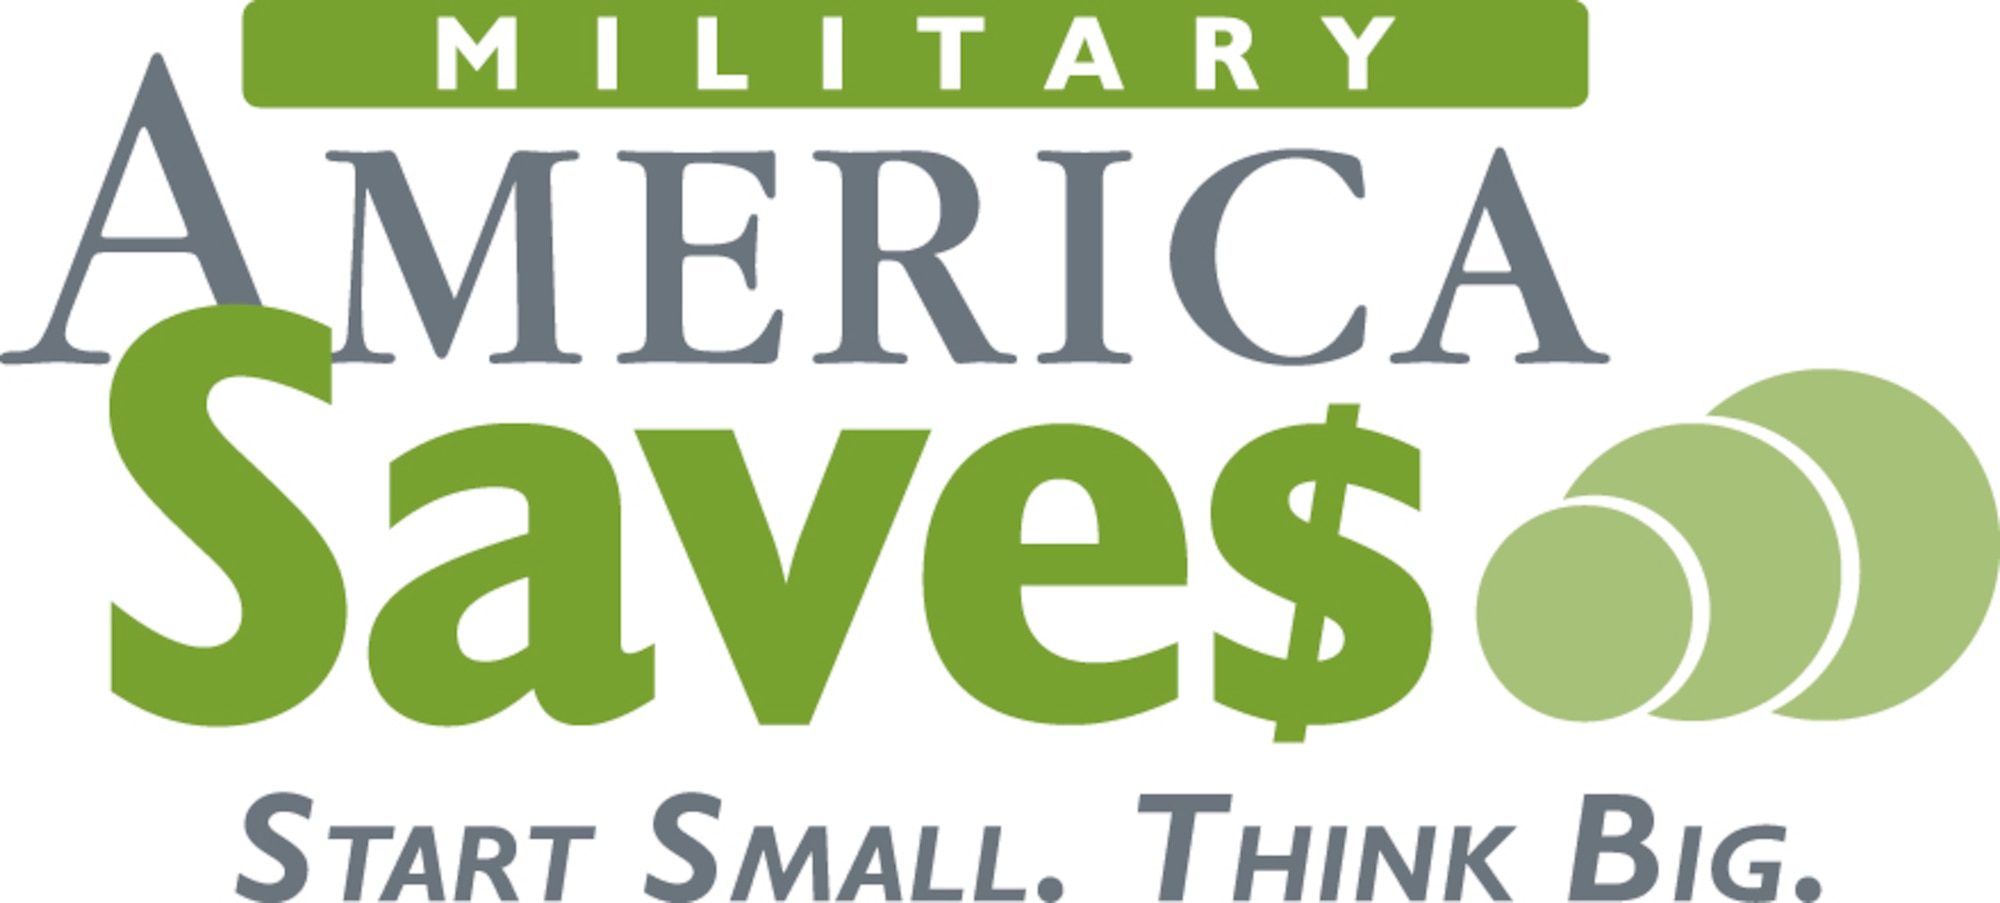 Military Saves is a Department of Defense campaign designed to promote financial readiness among servicemembers and their families by encouraging them to effectively manage or eliminate their debt and to begin saving for the future.